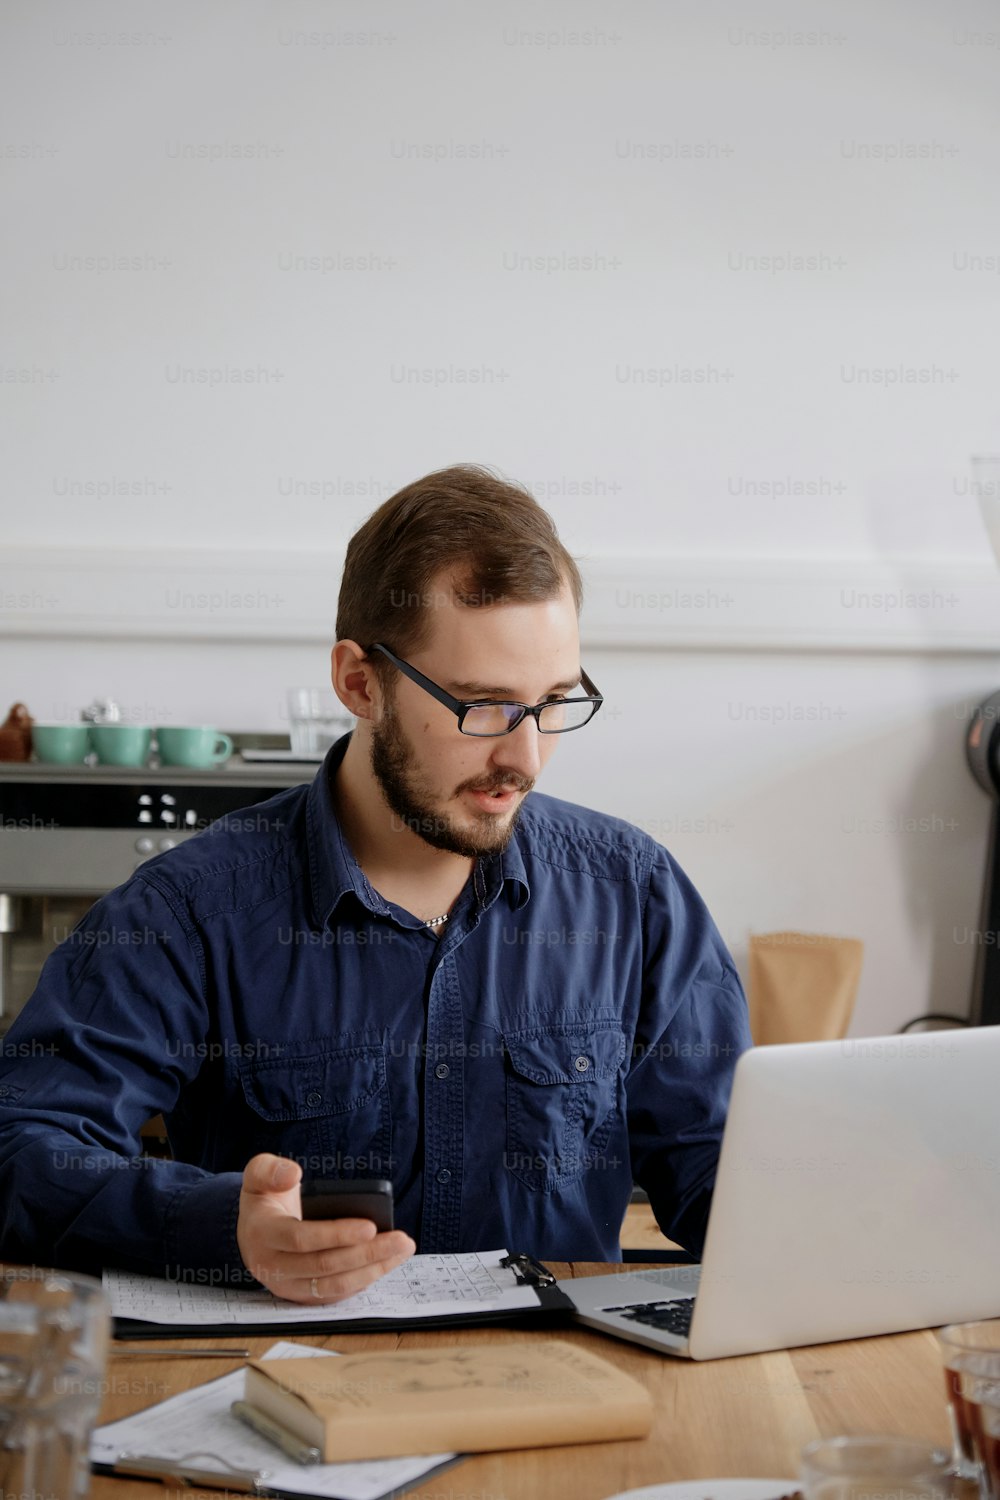 Portrait of serious man in glasses and blue shirt working on laptop and smart phone while sitting at wooden table against white wall